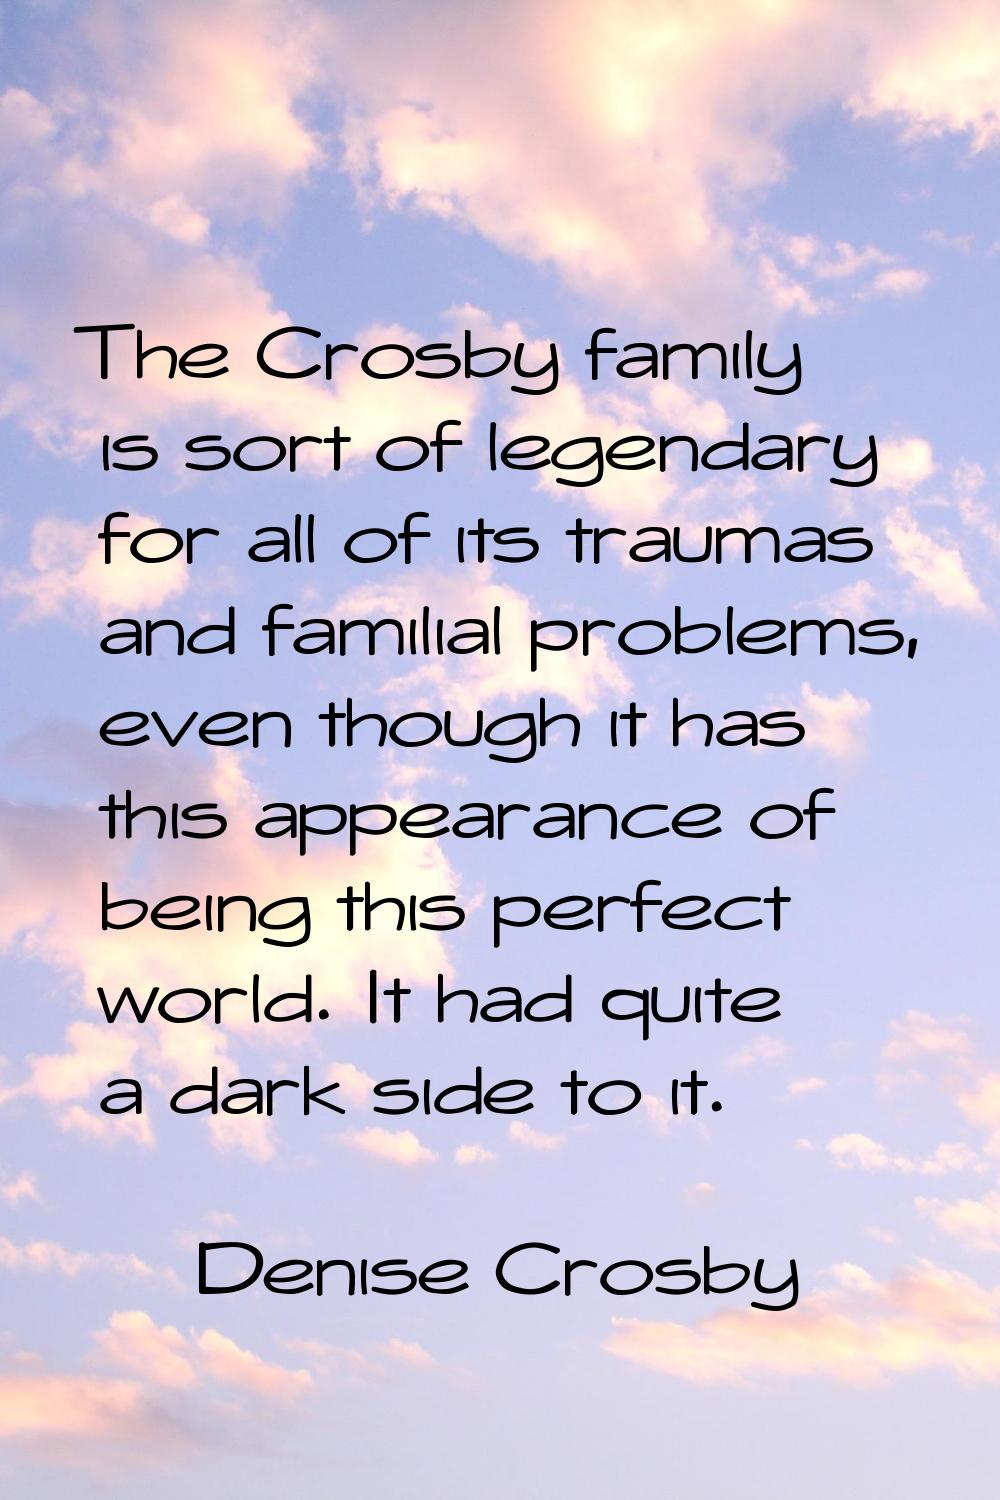 The Crosby family is sort of legendary for all of its traumas and familial problems, even though it